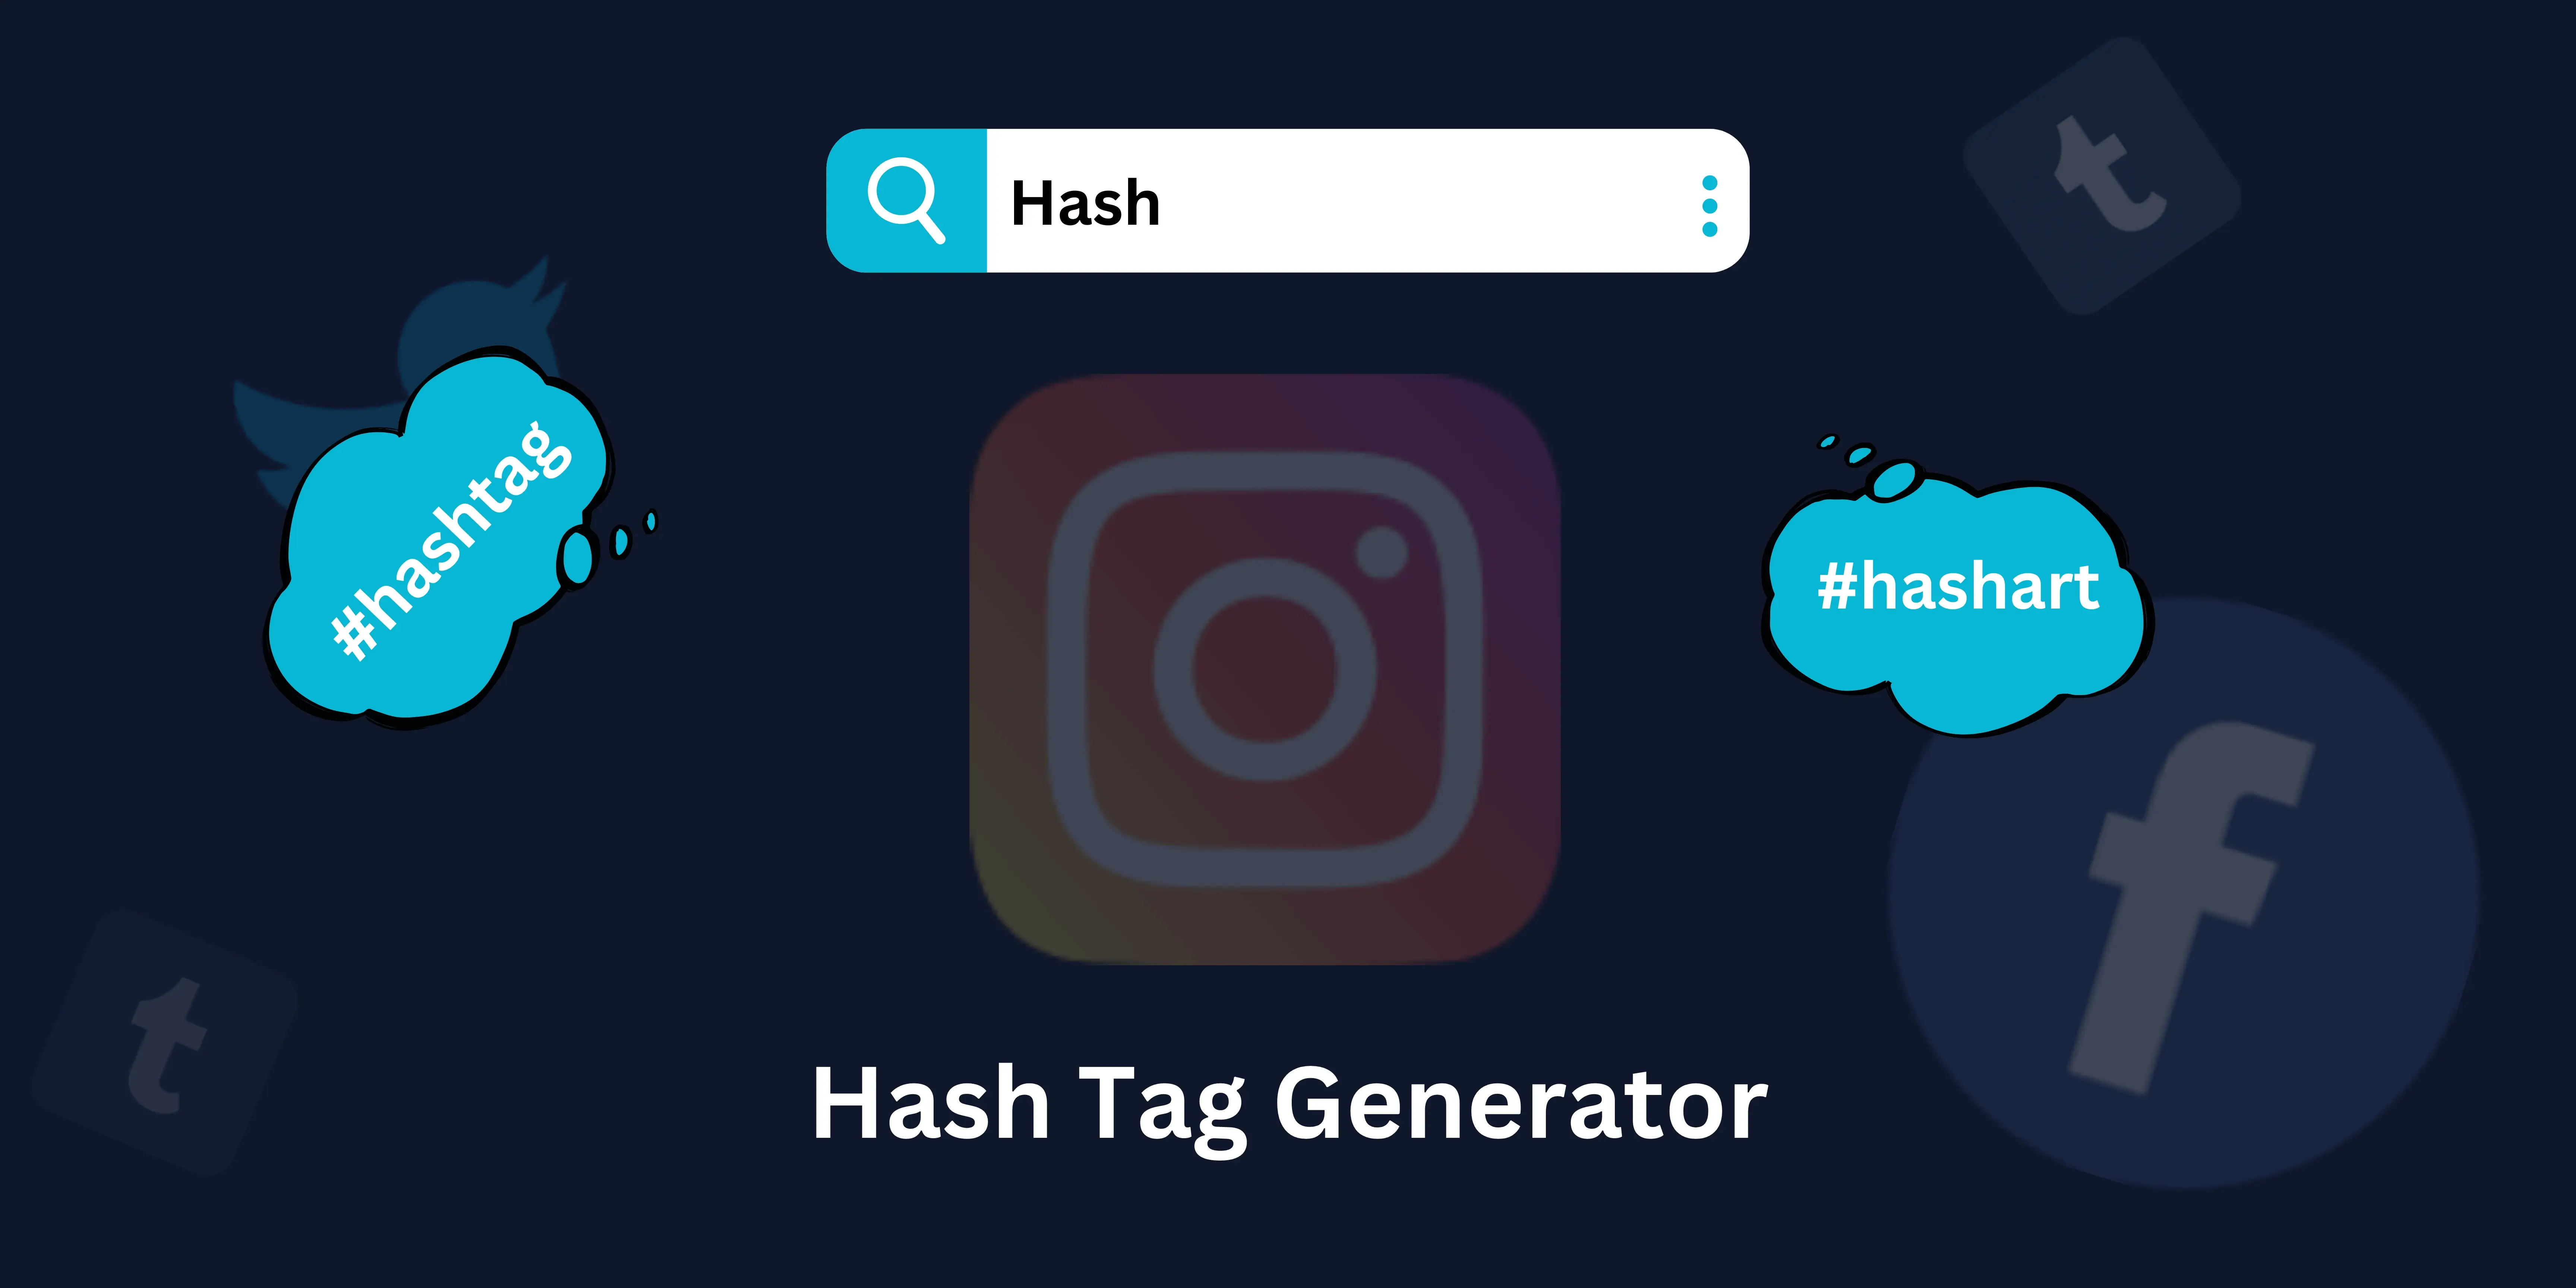 Search results: #hashtag and #hasart in cloud-like bubbles with social icons background.